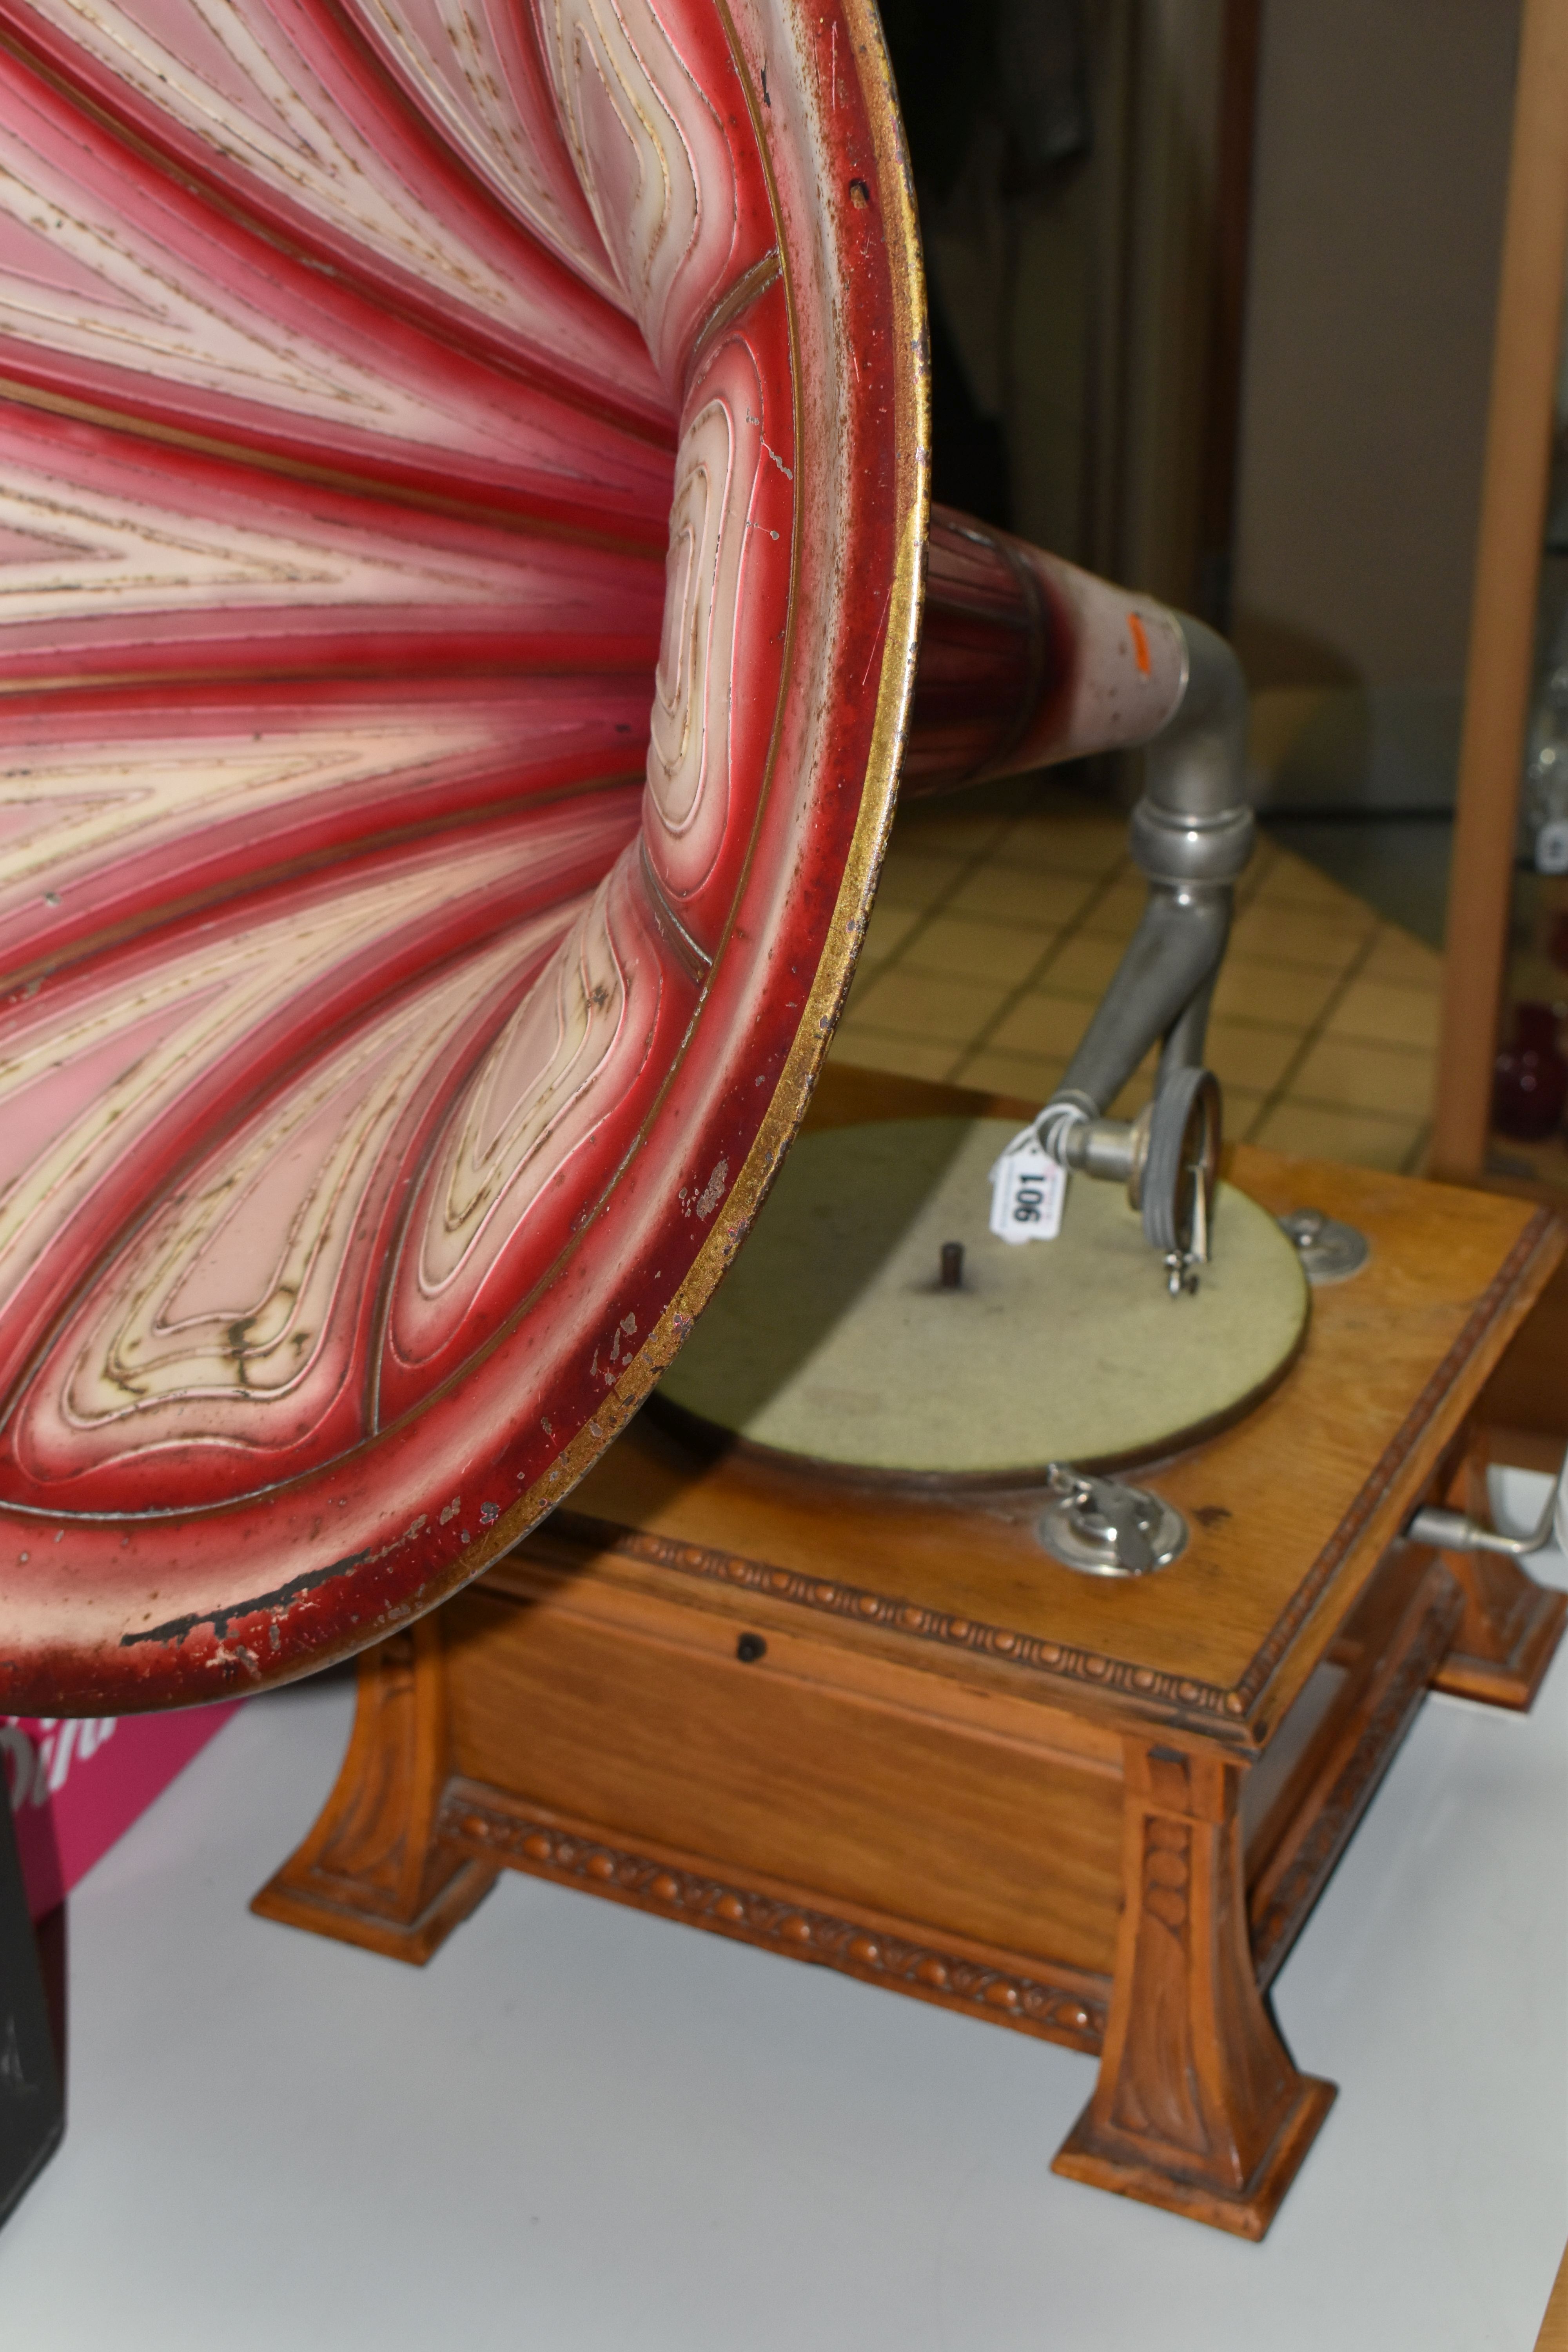 AN EARLY 20TH CENTURY PALE OAK PARLOPHONE TABLE TOP GRAMOPHONE, with moulded edges and on splayed